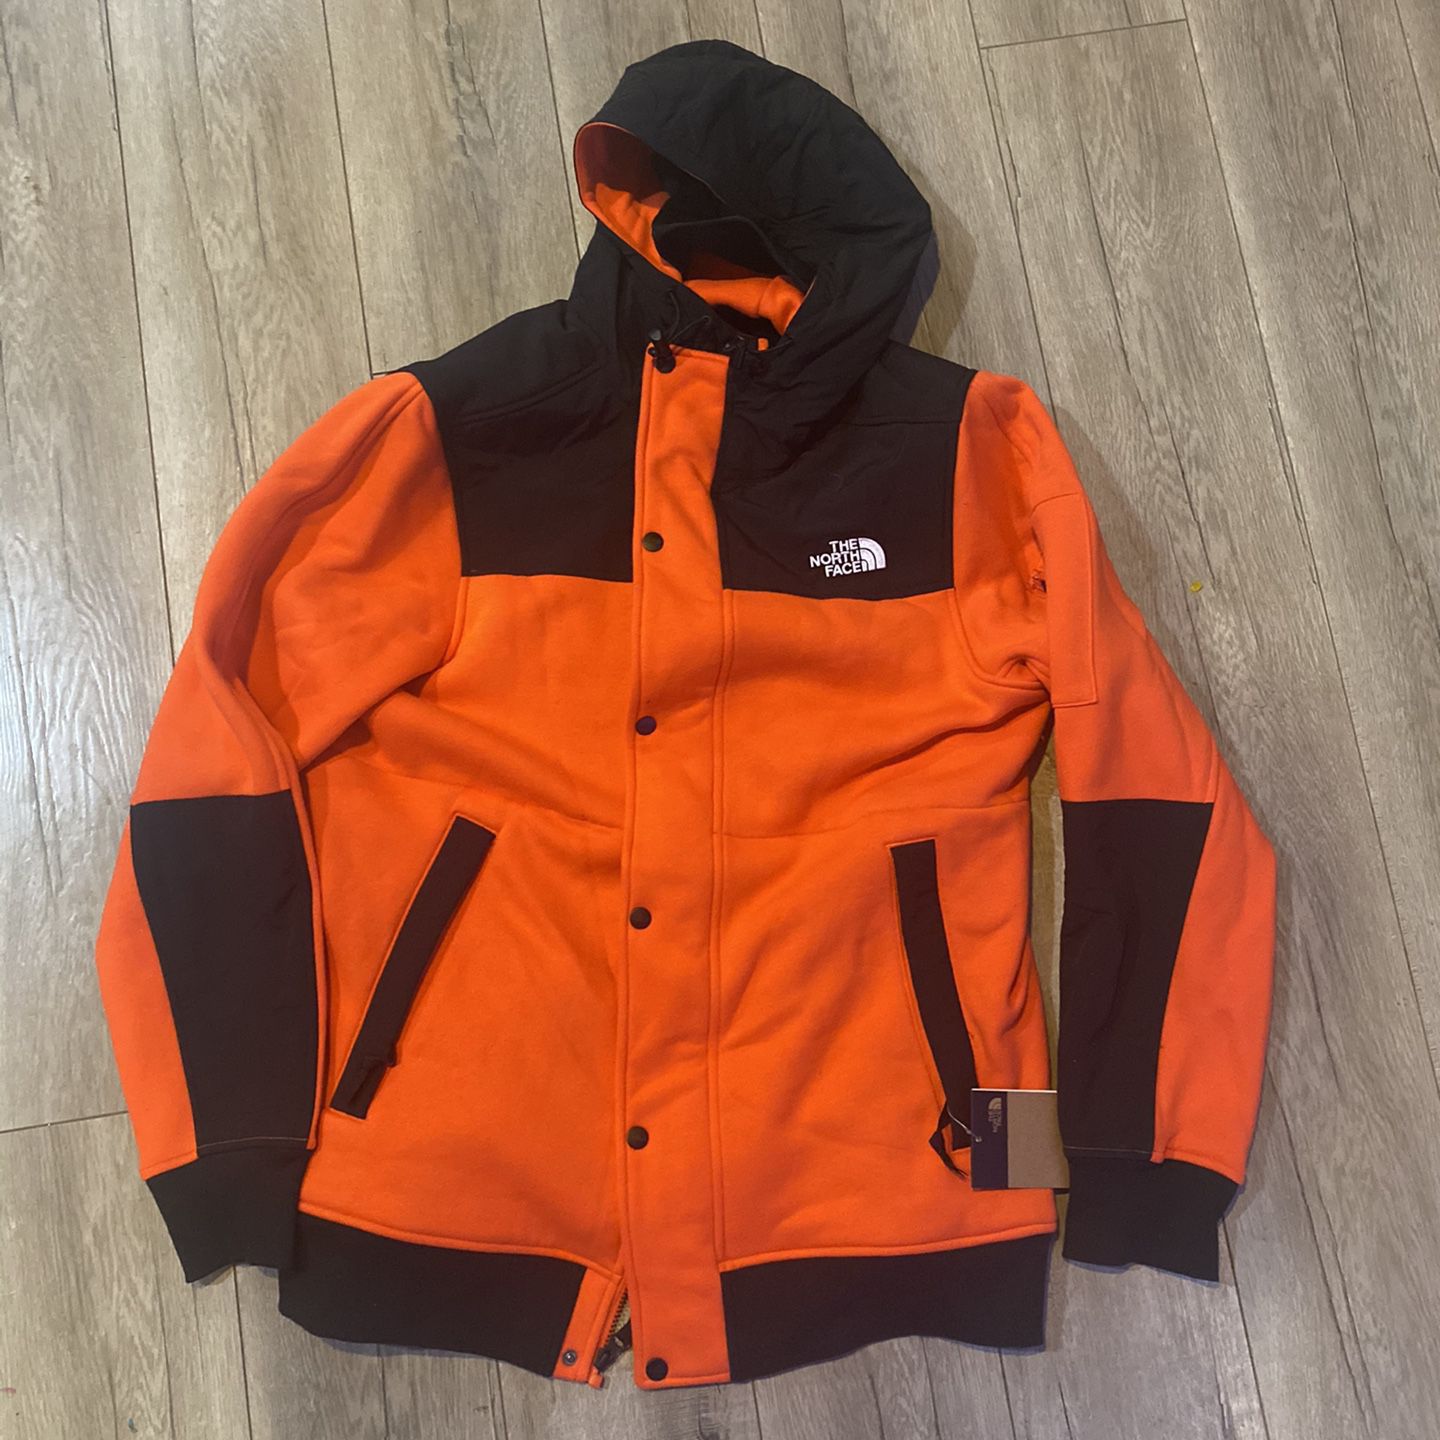 North Face & Patagonia Jackets! Brand New AndGreat Price